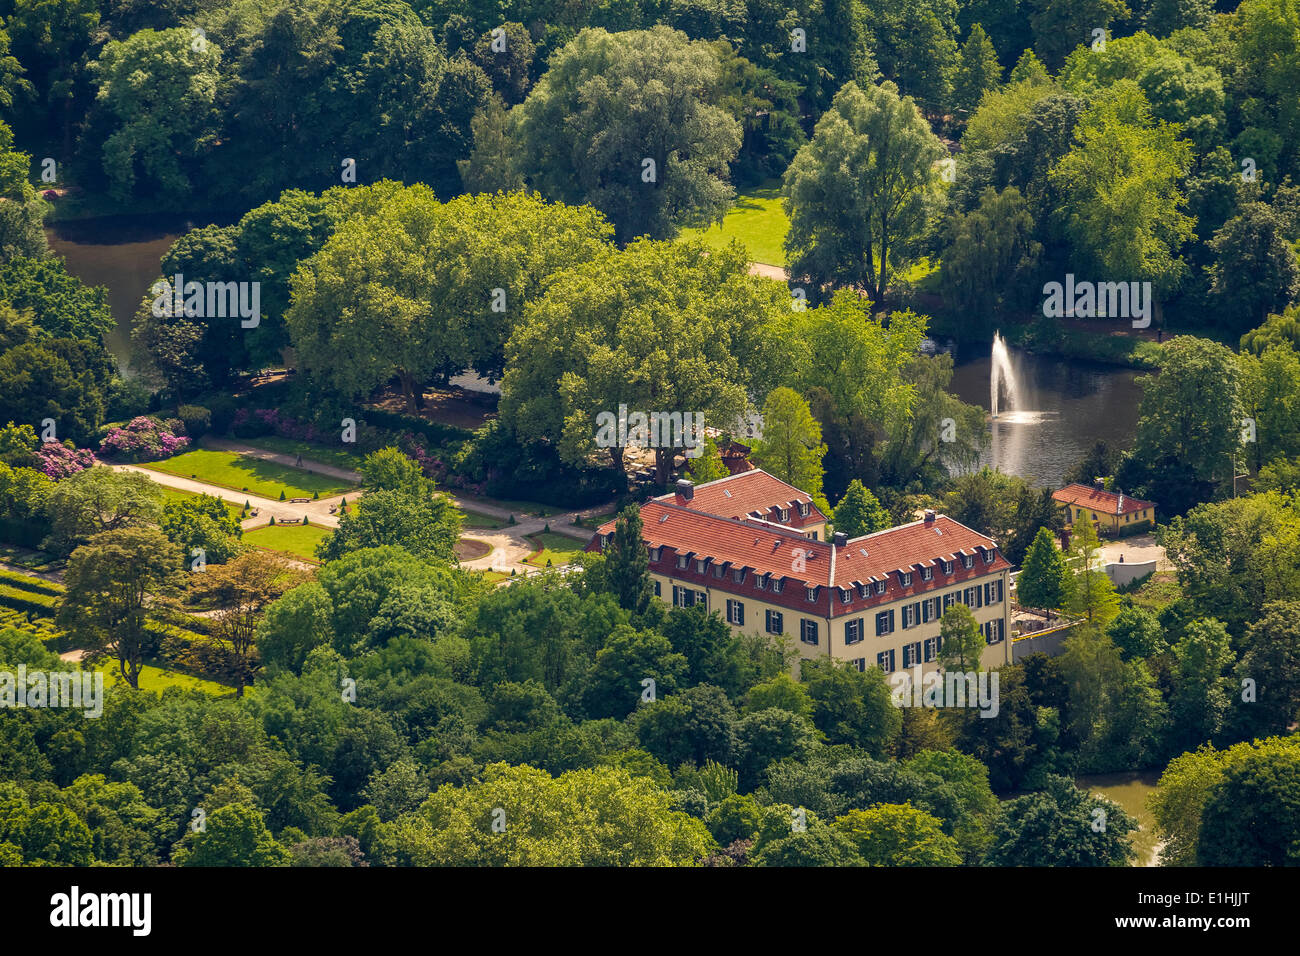 Aerial view, Schloss Berge moated castle, Gelsenkirchen, Ruhr district, North Rhine-Westphalia, Germany Stock Photo